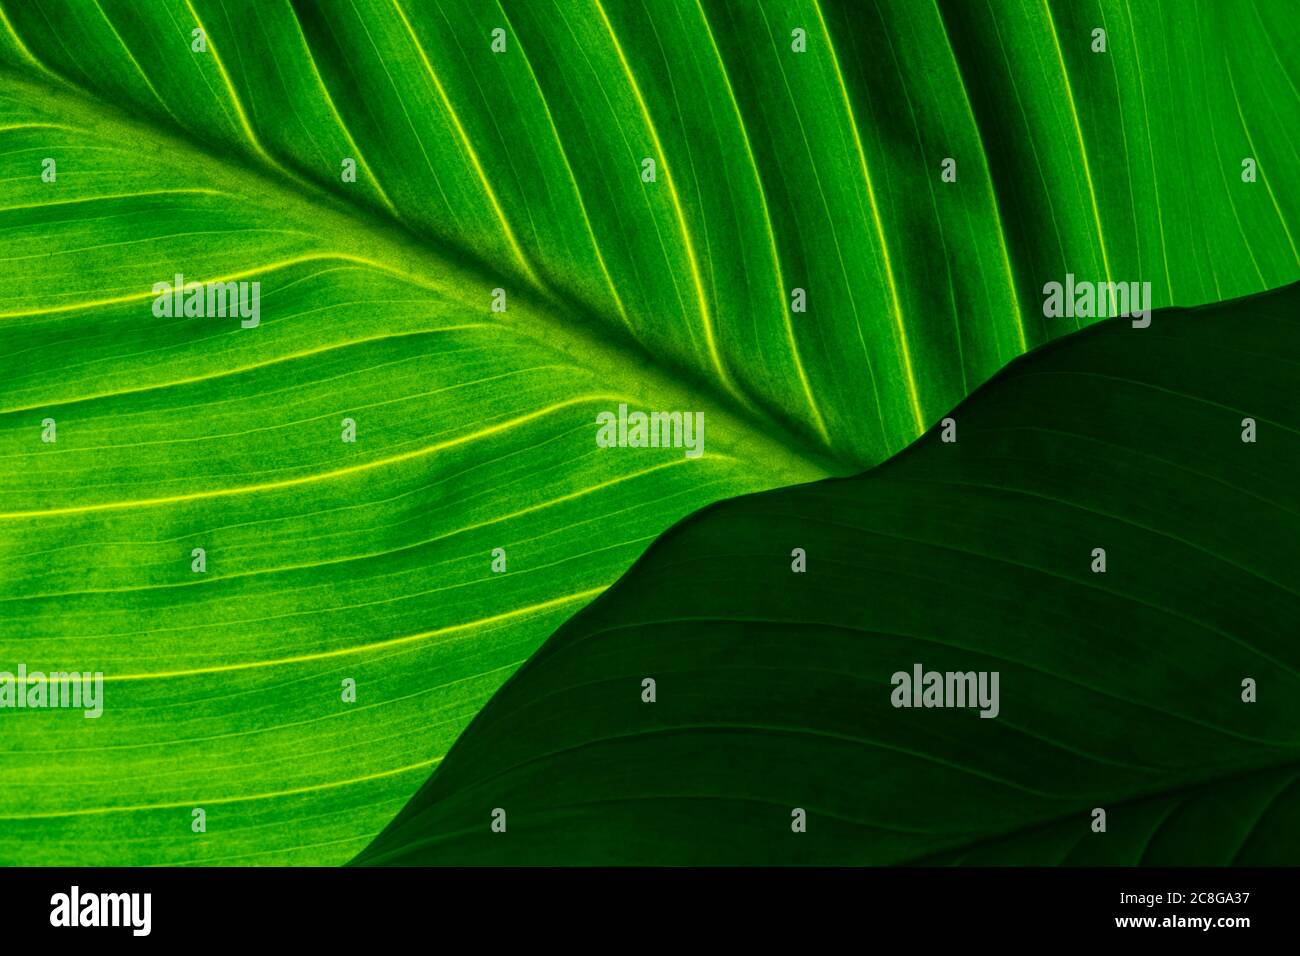 Green leaf with dramatic lighting Stock Photo